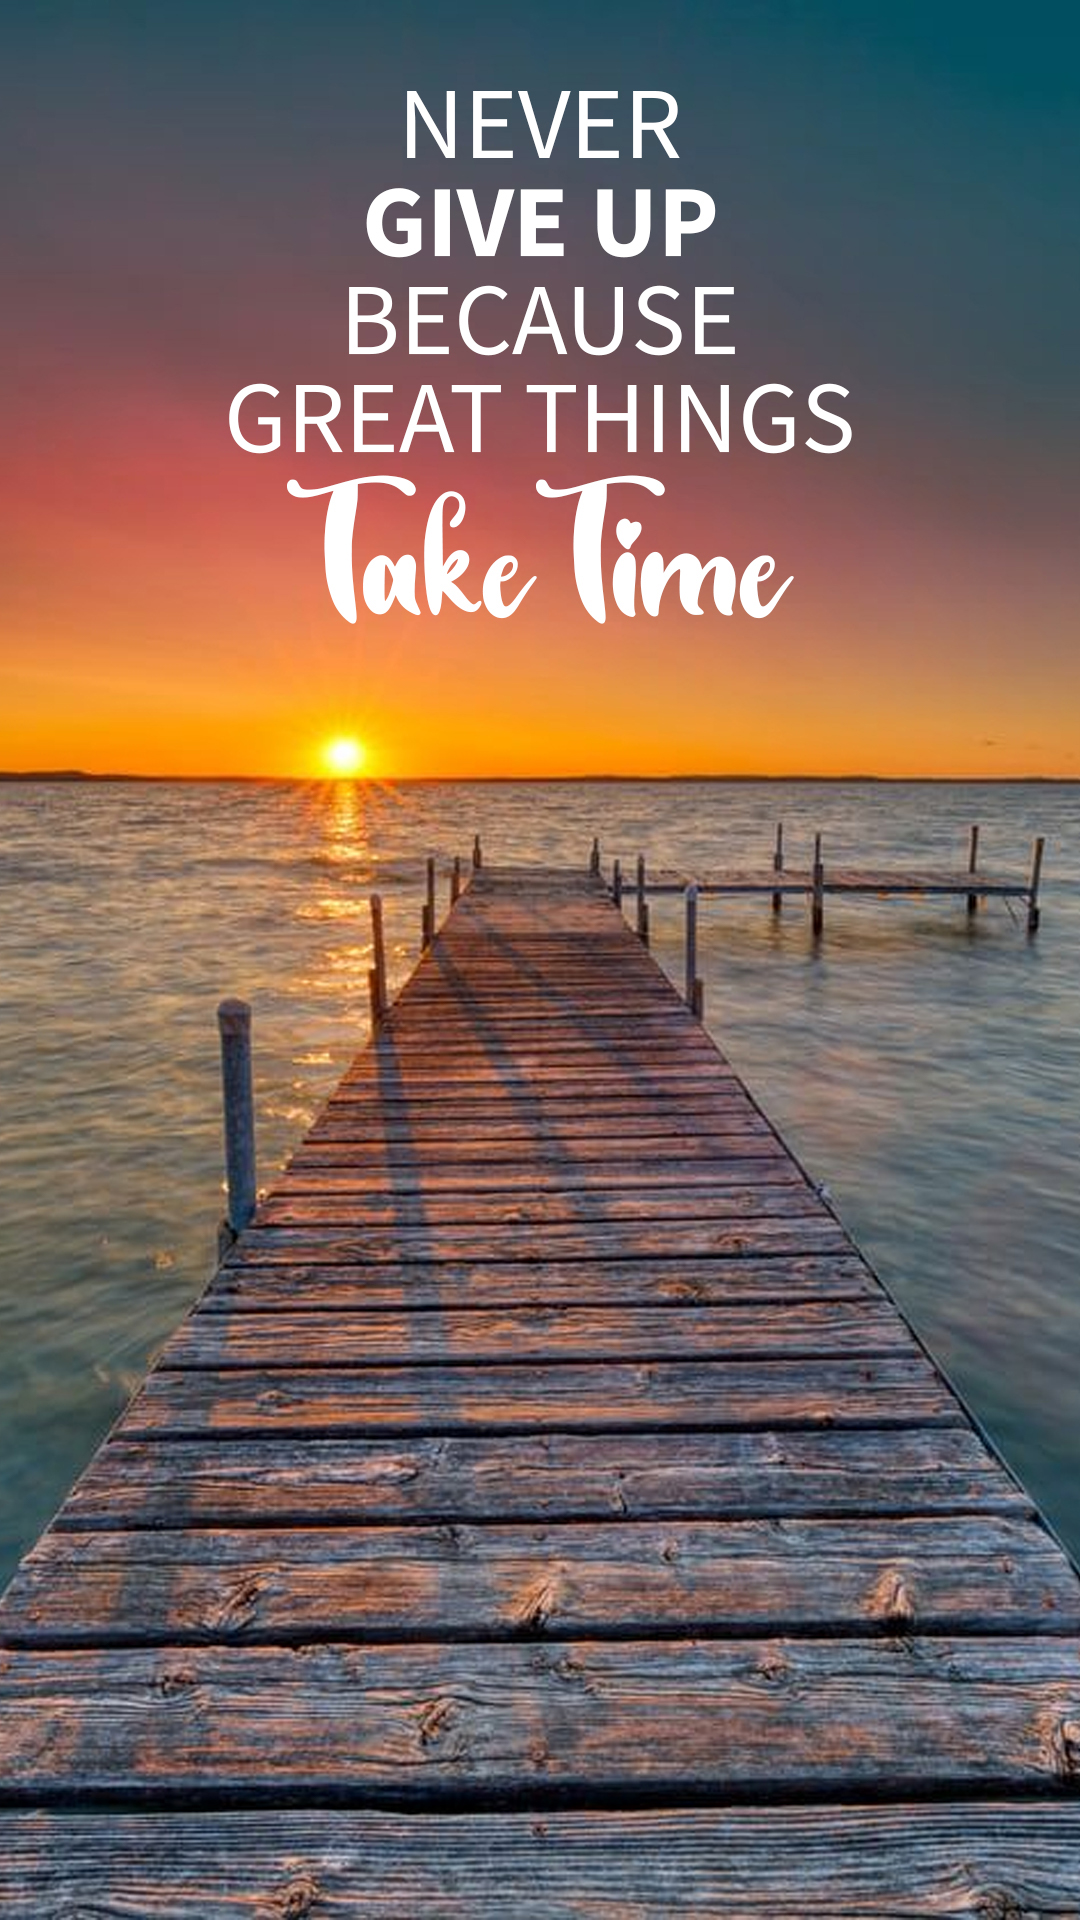 427 Great Things Take Time Images Stock Photos  Vectors  Shutterstock